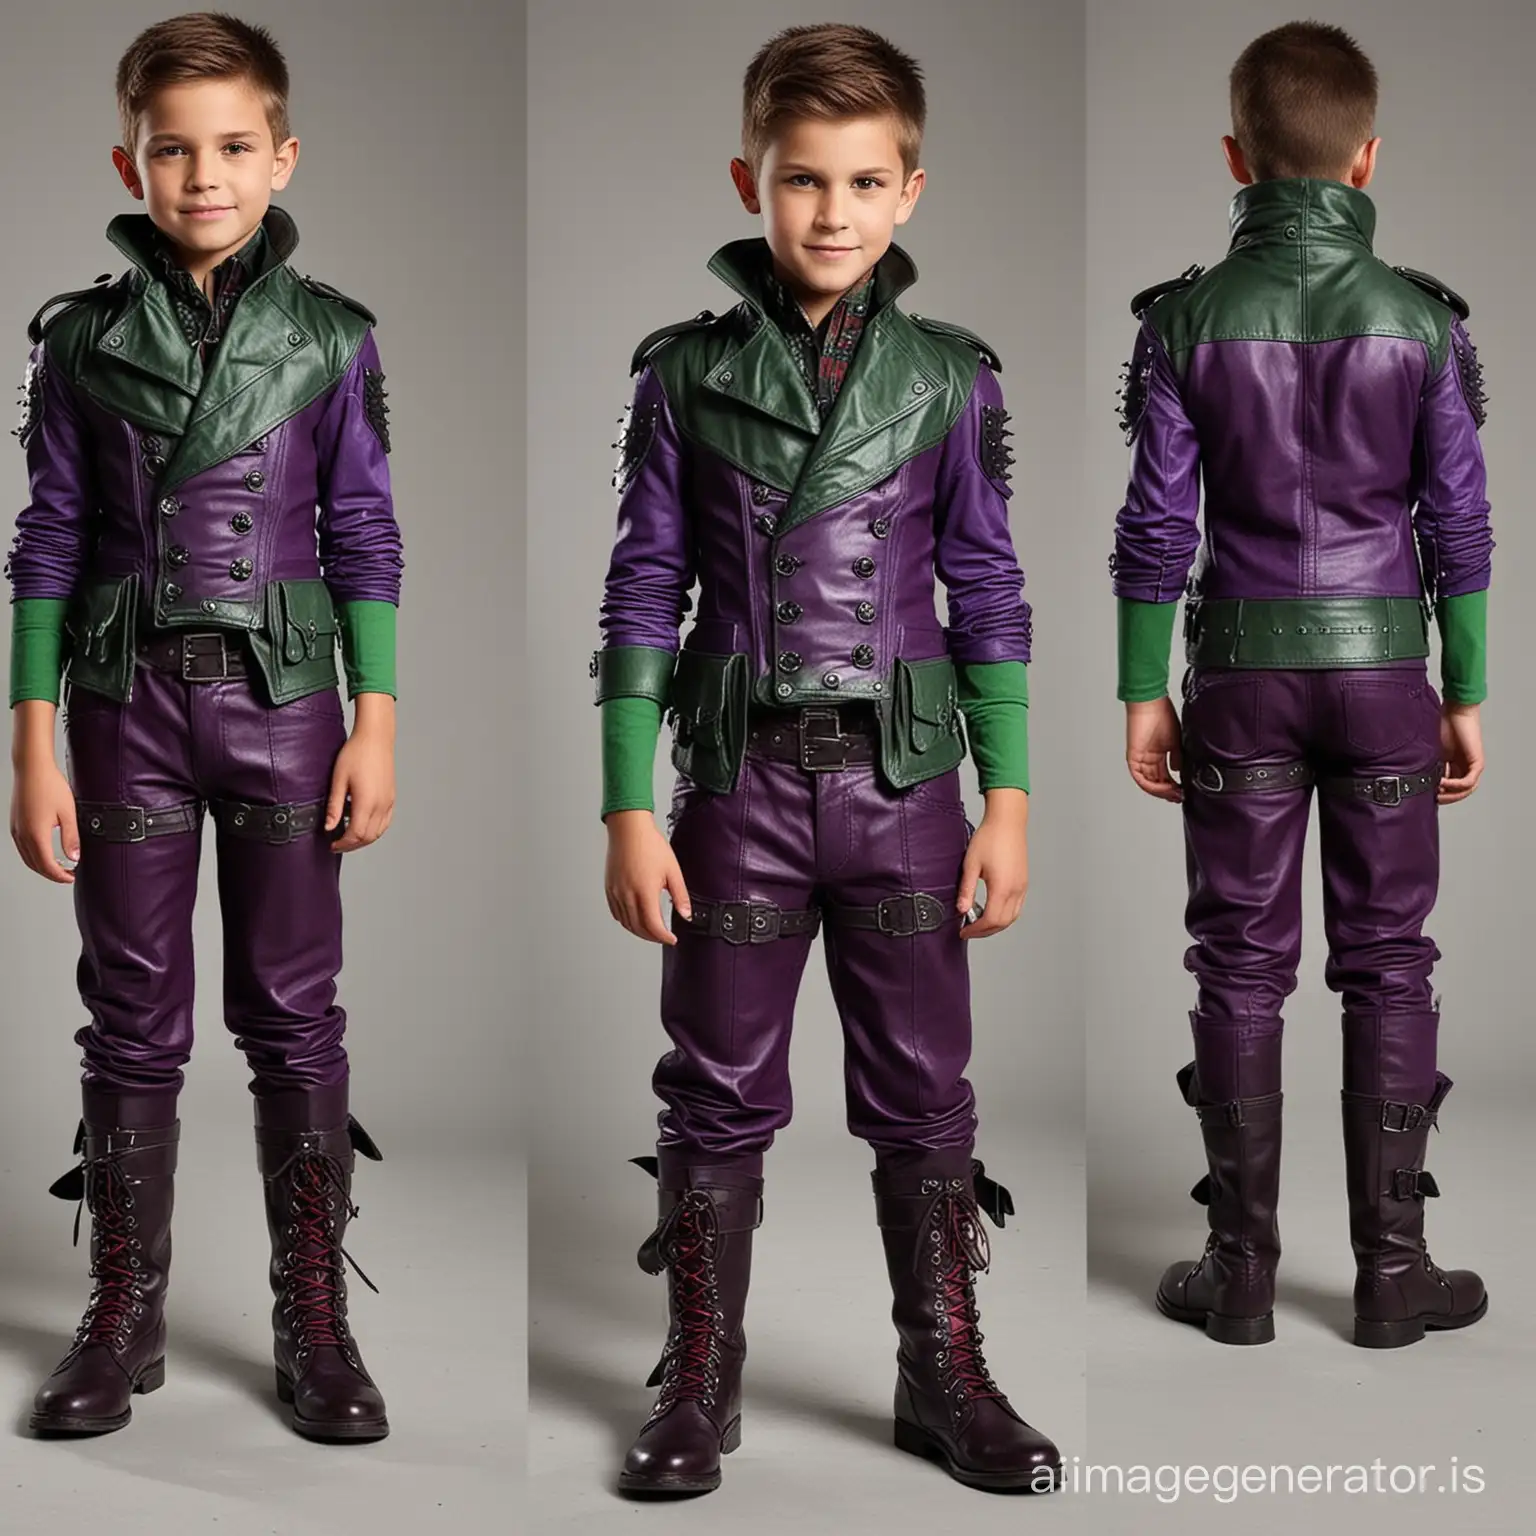 Create a villain outfit for a strong 8 year old boy villain with abs, cool, wicked, leather, shorts, comfortable yet intimidating, various shades of purple with hints of both green and red, both red and green should be included in every outfit but purple should be the main color, the boots should also be coloured and match the outfit